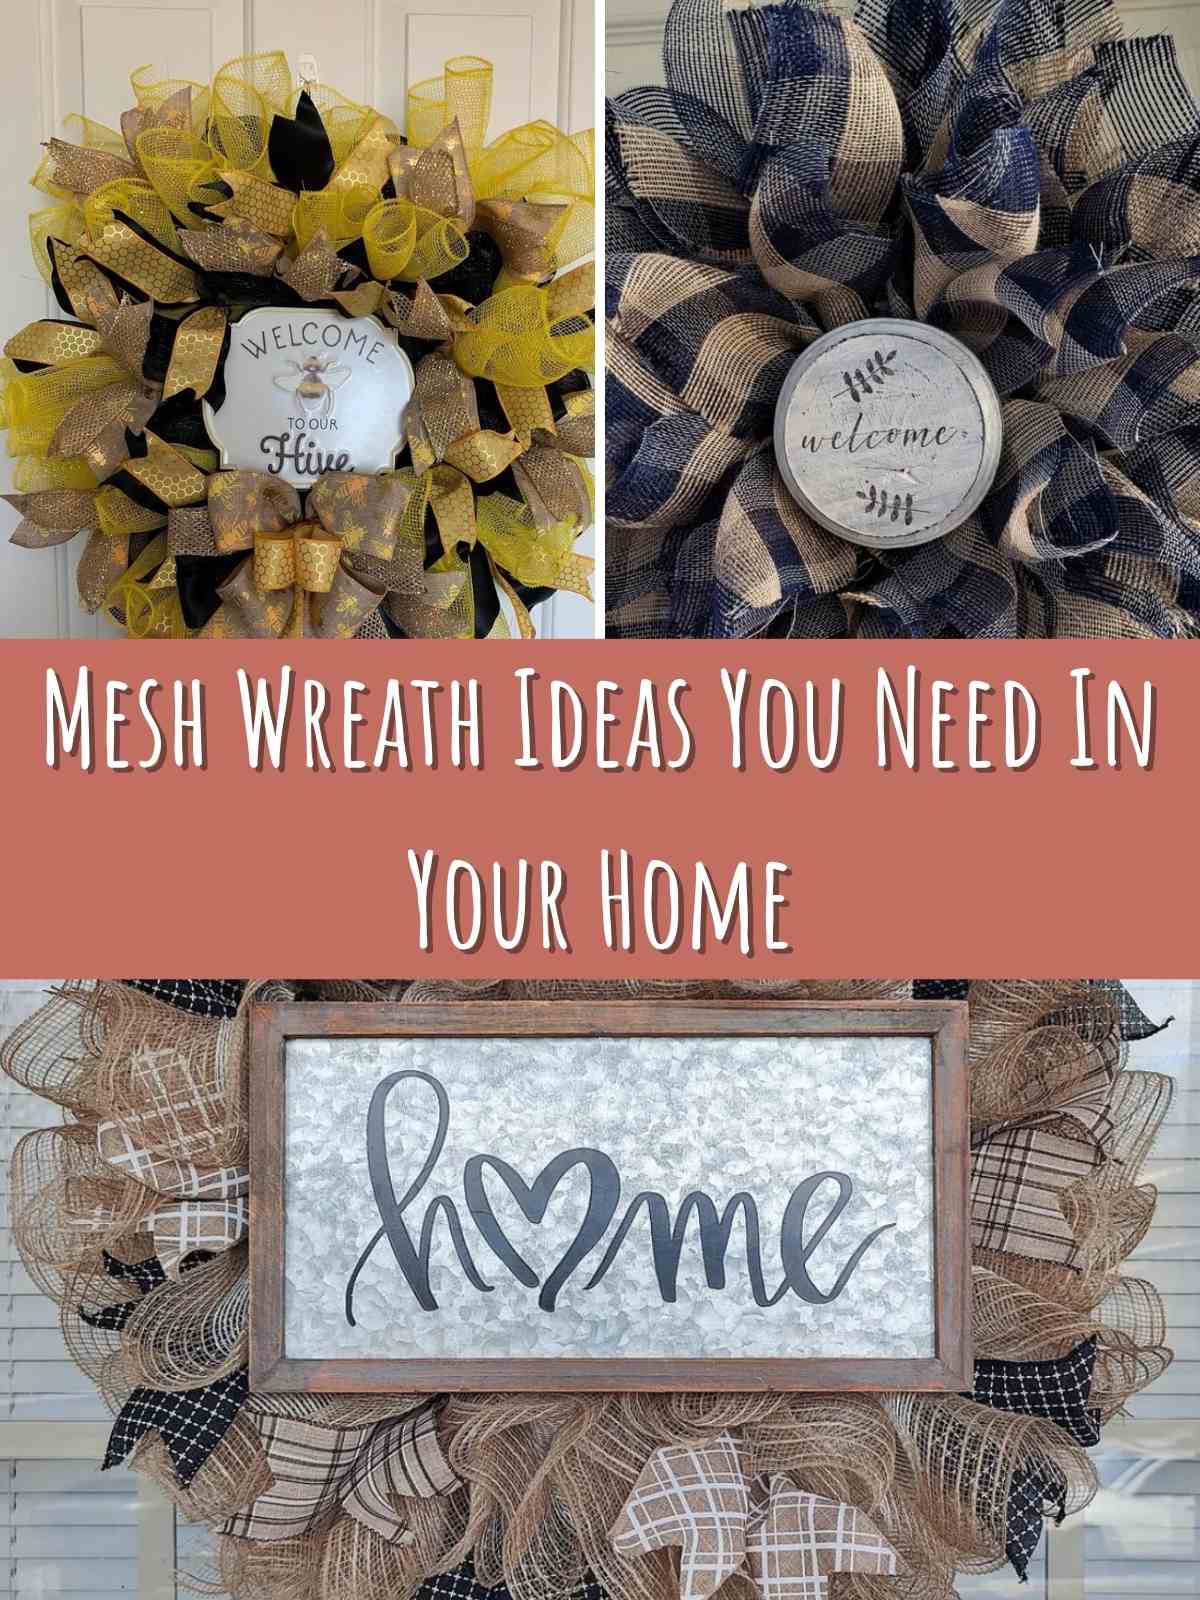 mesh wreath ideas you need in your home. 3 different photo idea.